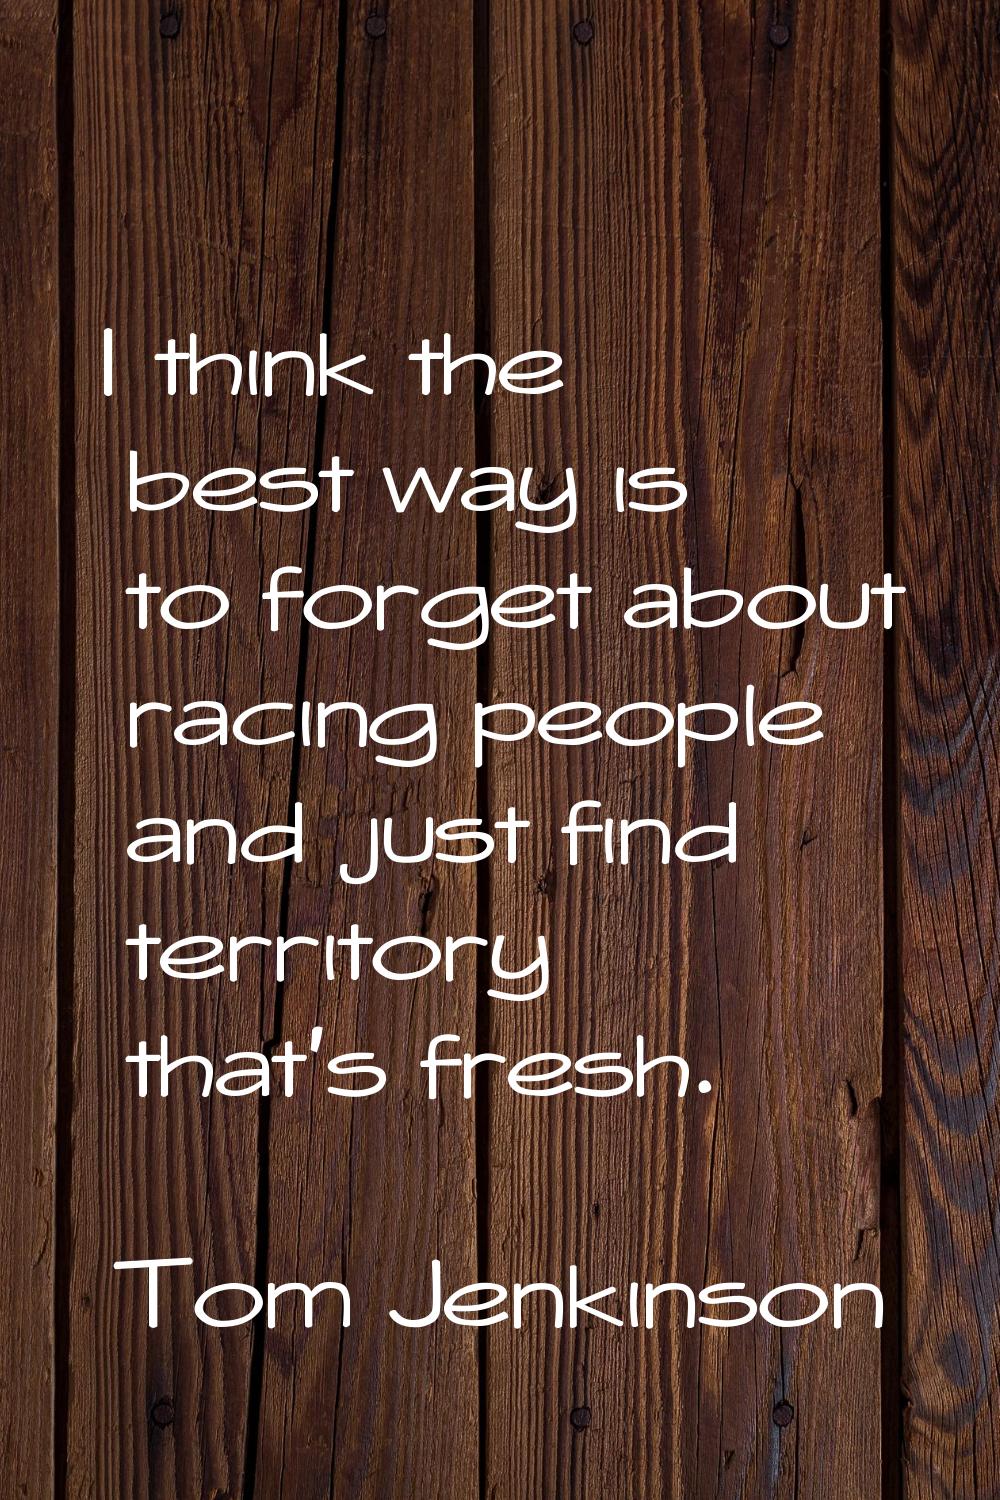 I think the best way is to forget about racing people and just find territory that's fresh.